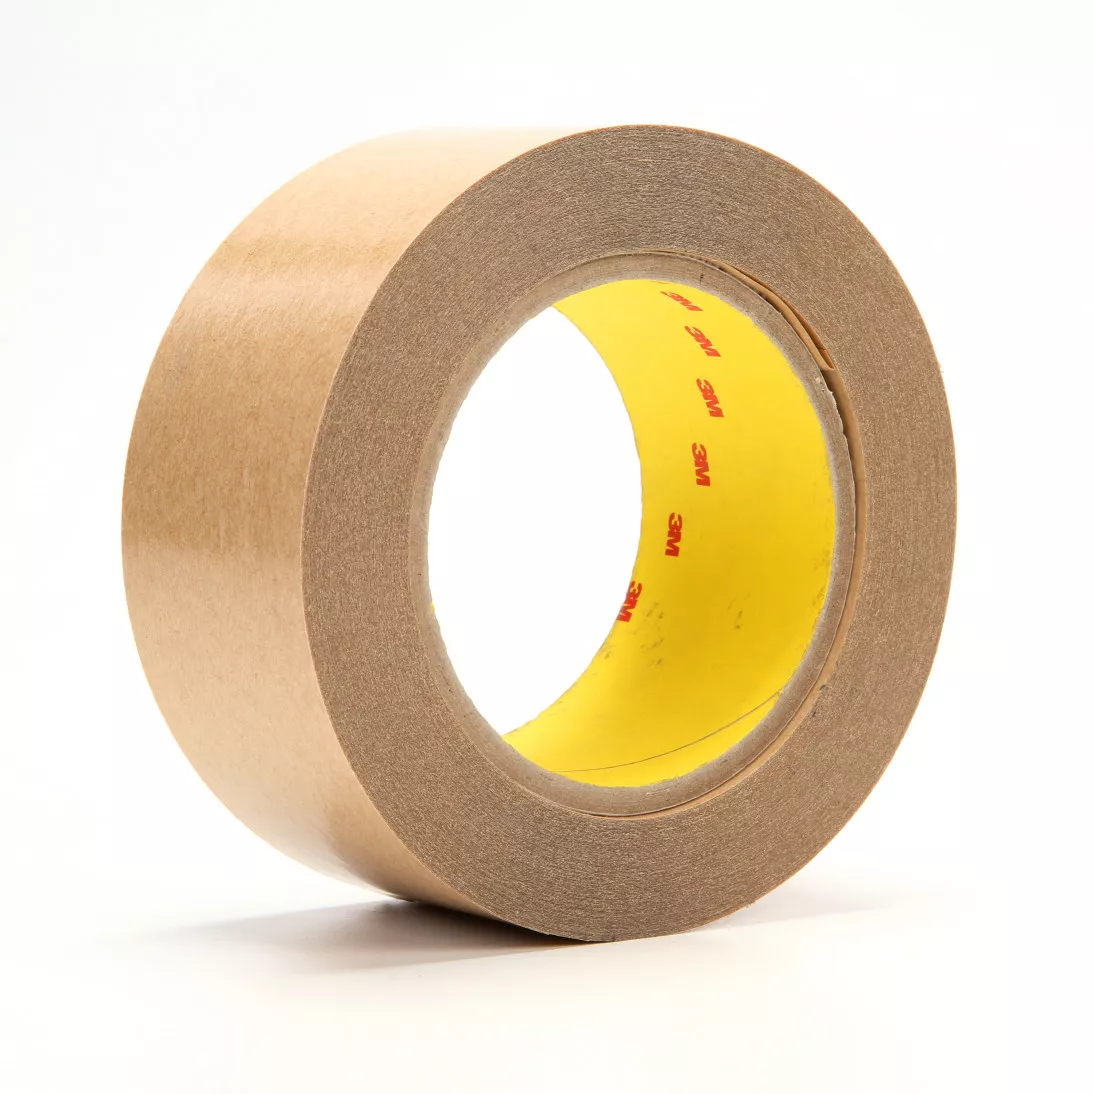 3M™ Double Coated Tape 415, Clear, 2 in x 36 yd, 4 mil, 24 rolls per
case